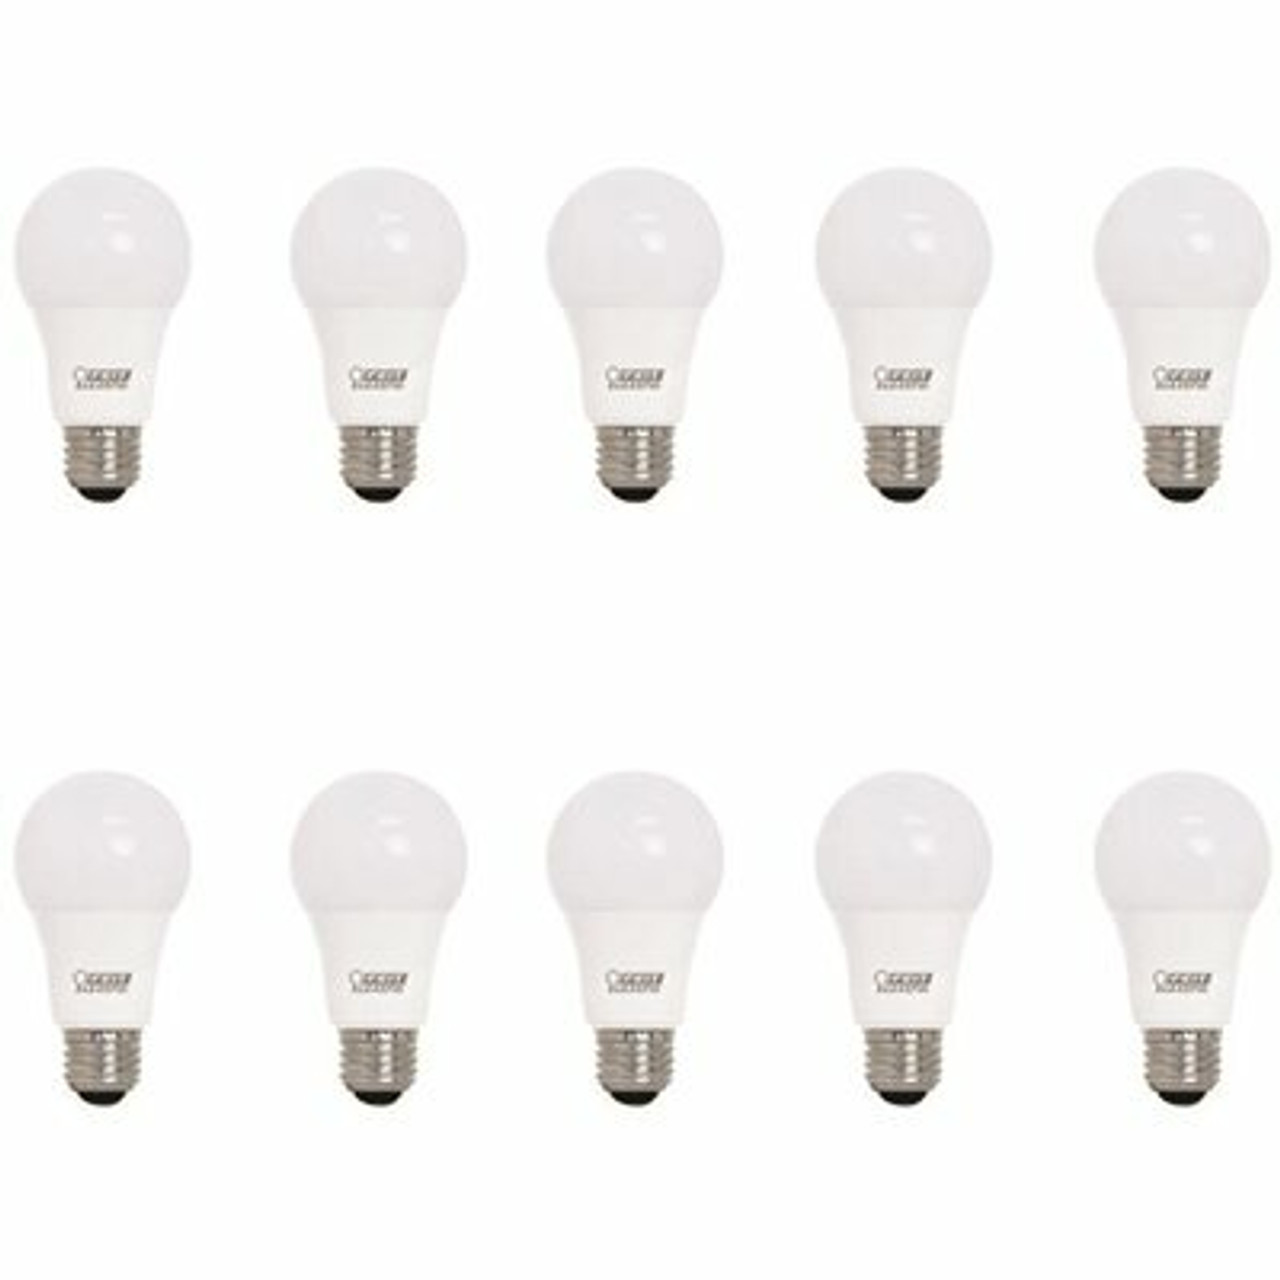 Feit Electric 60-Watt Equivalent A19 Non-Dimmable 90+ Cri Led Light Bulb, Daylight 5000K (10-Pack)